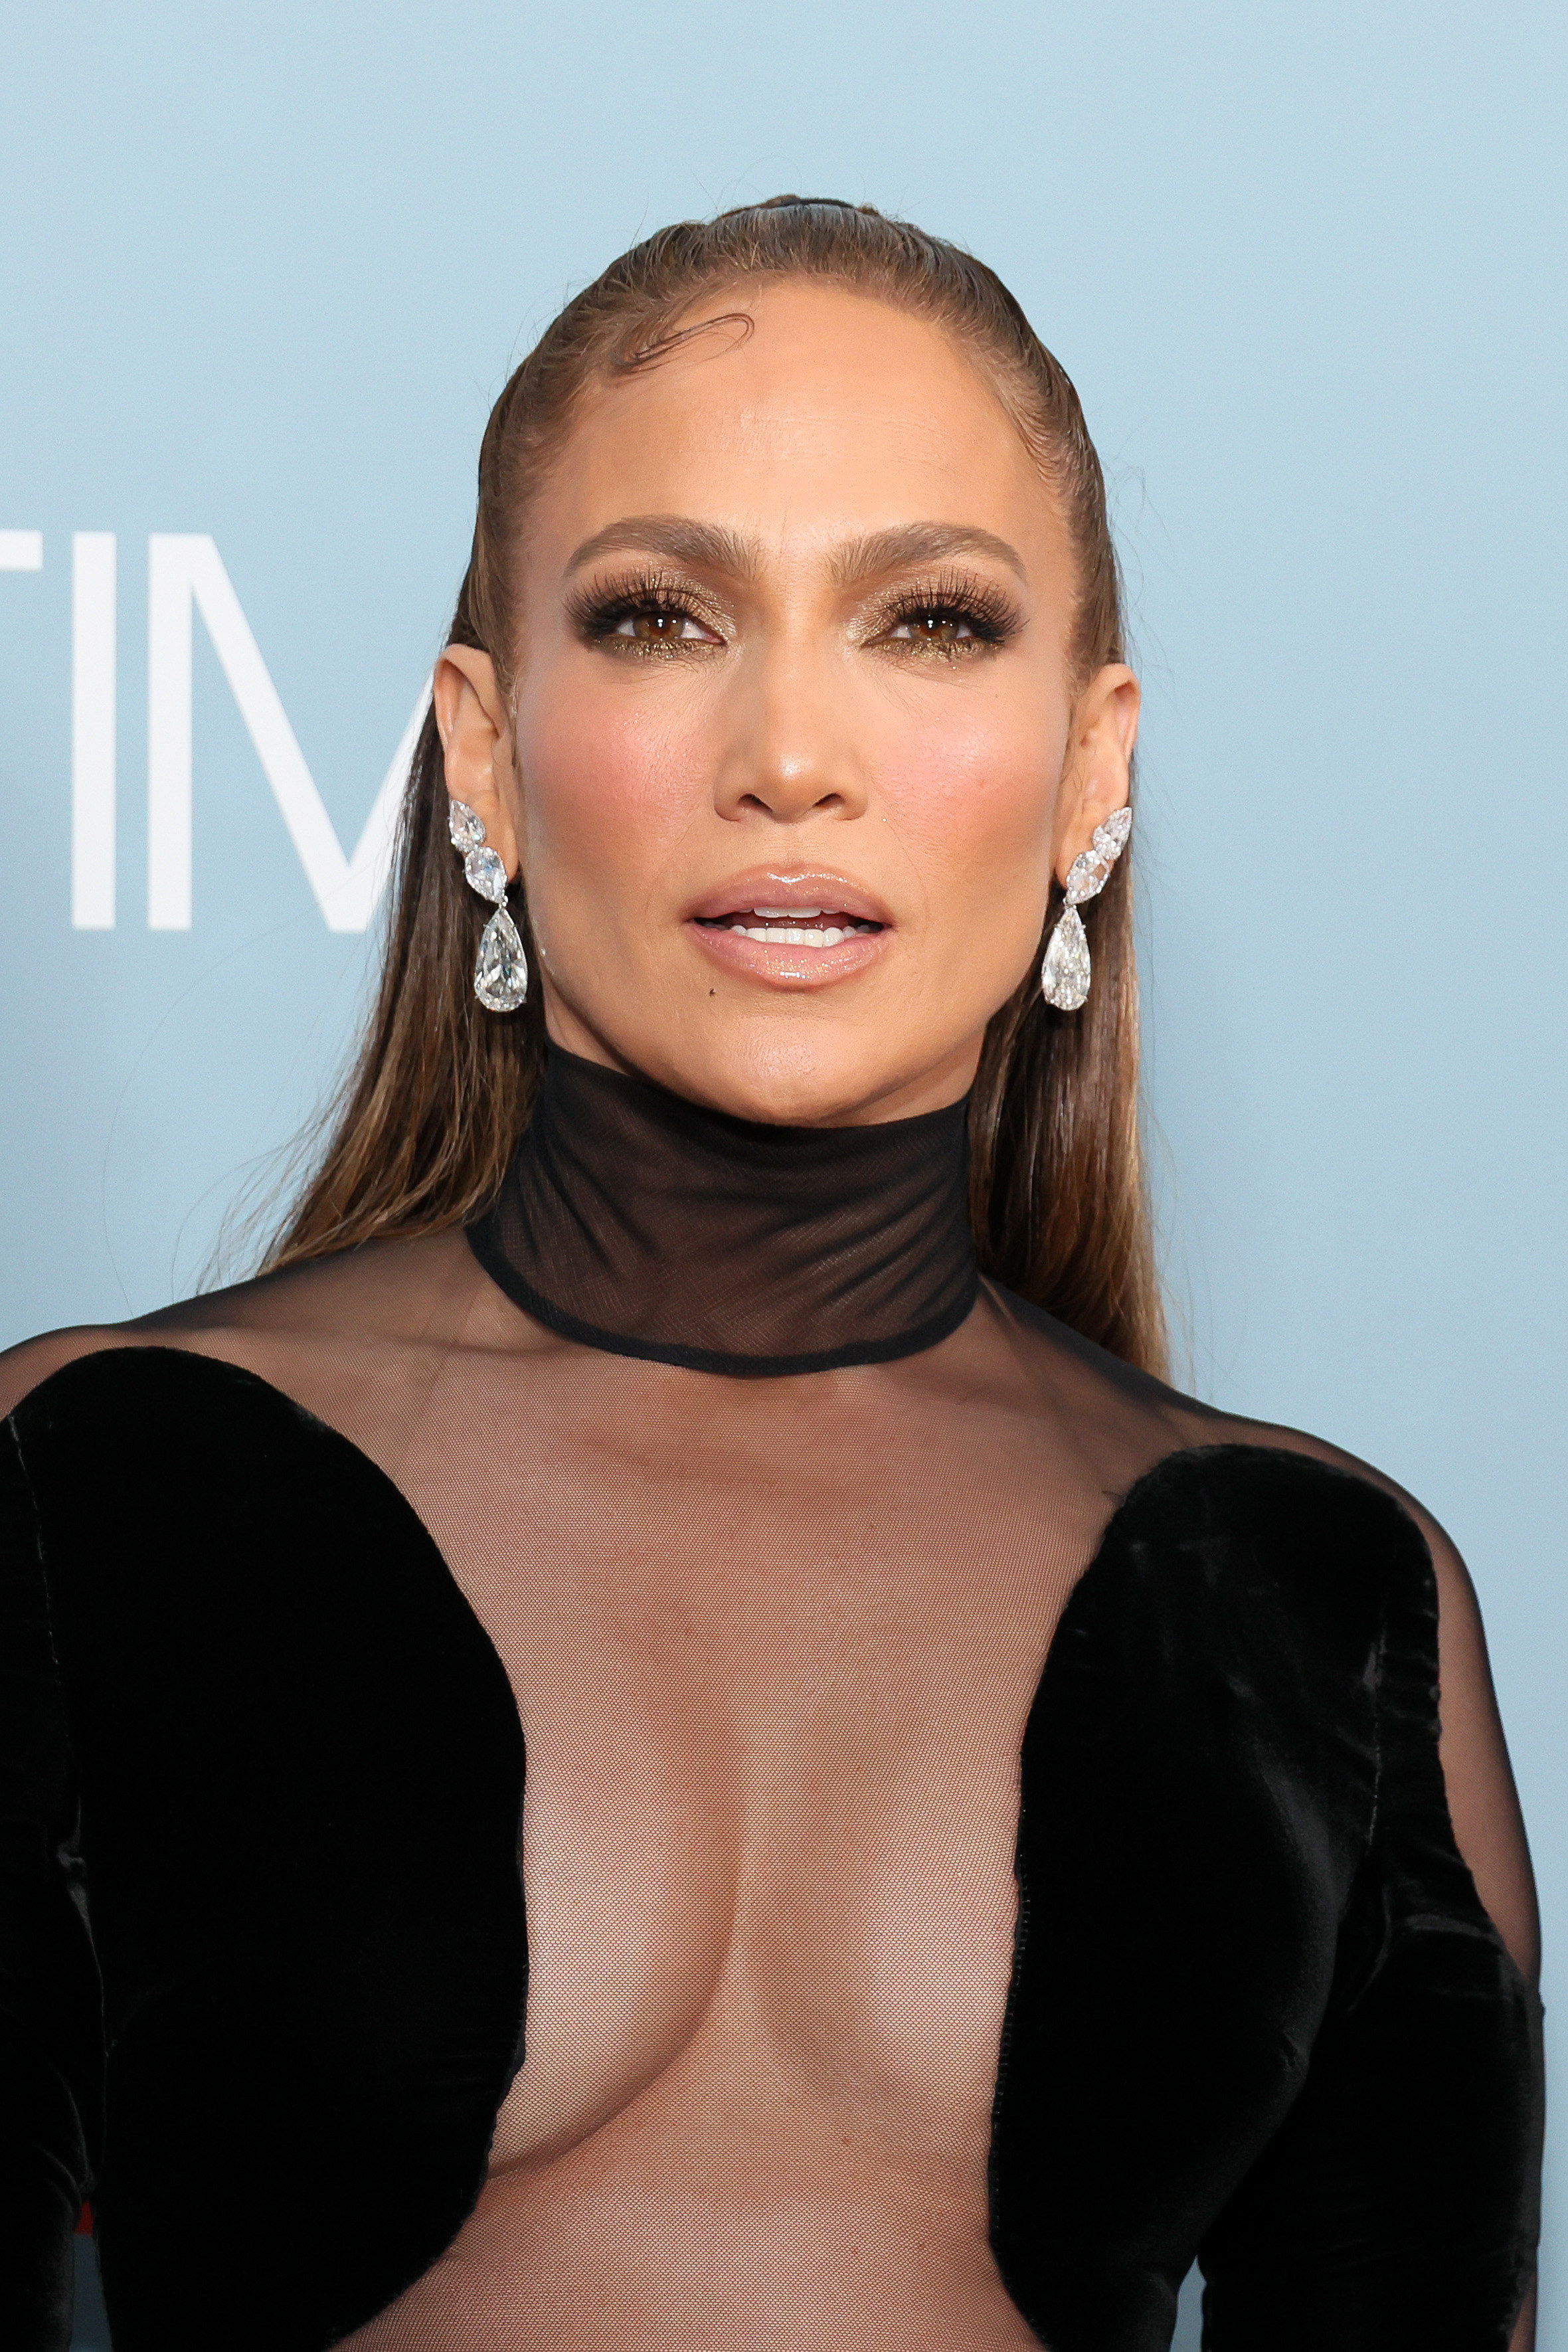 JLo in a transparent lacy cleavage-baring top with a choker